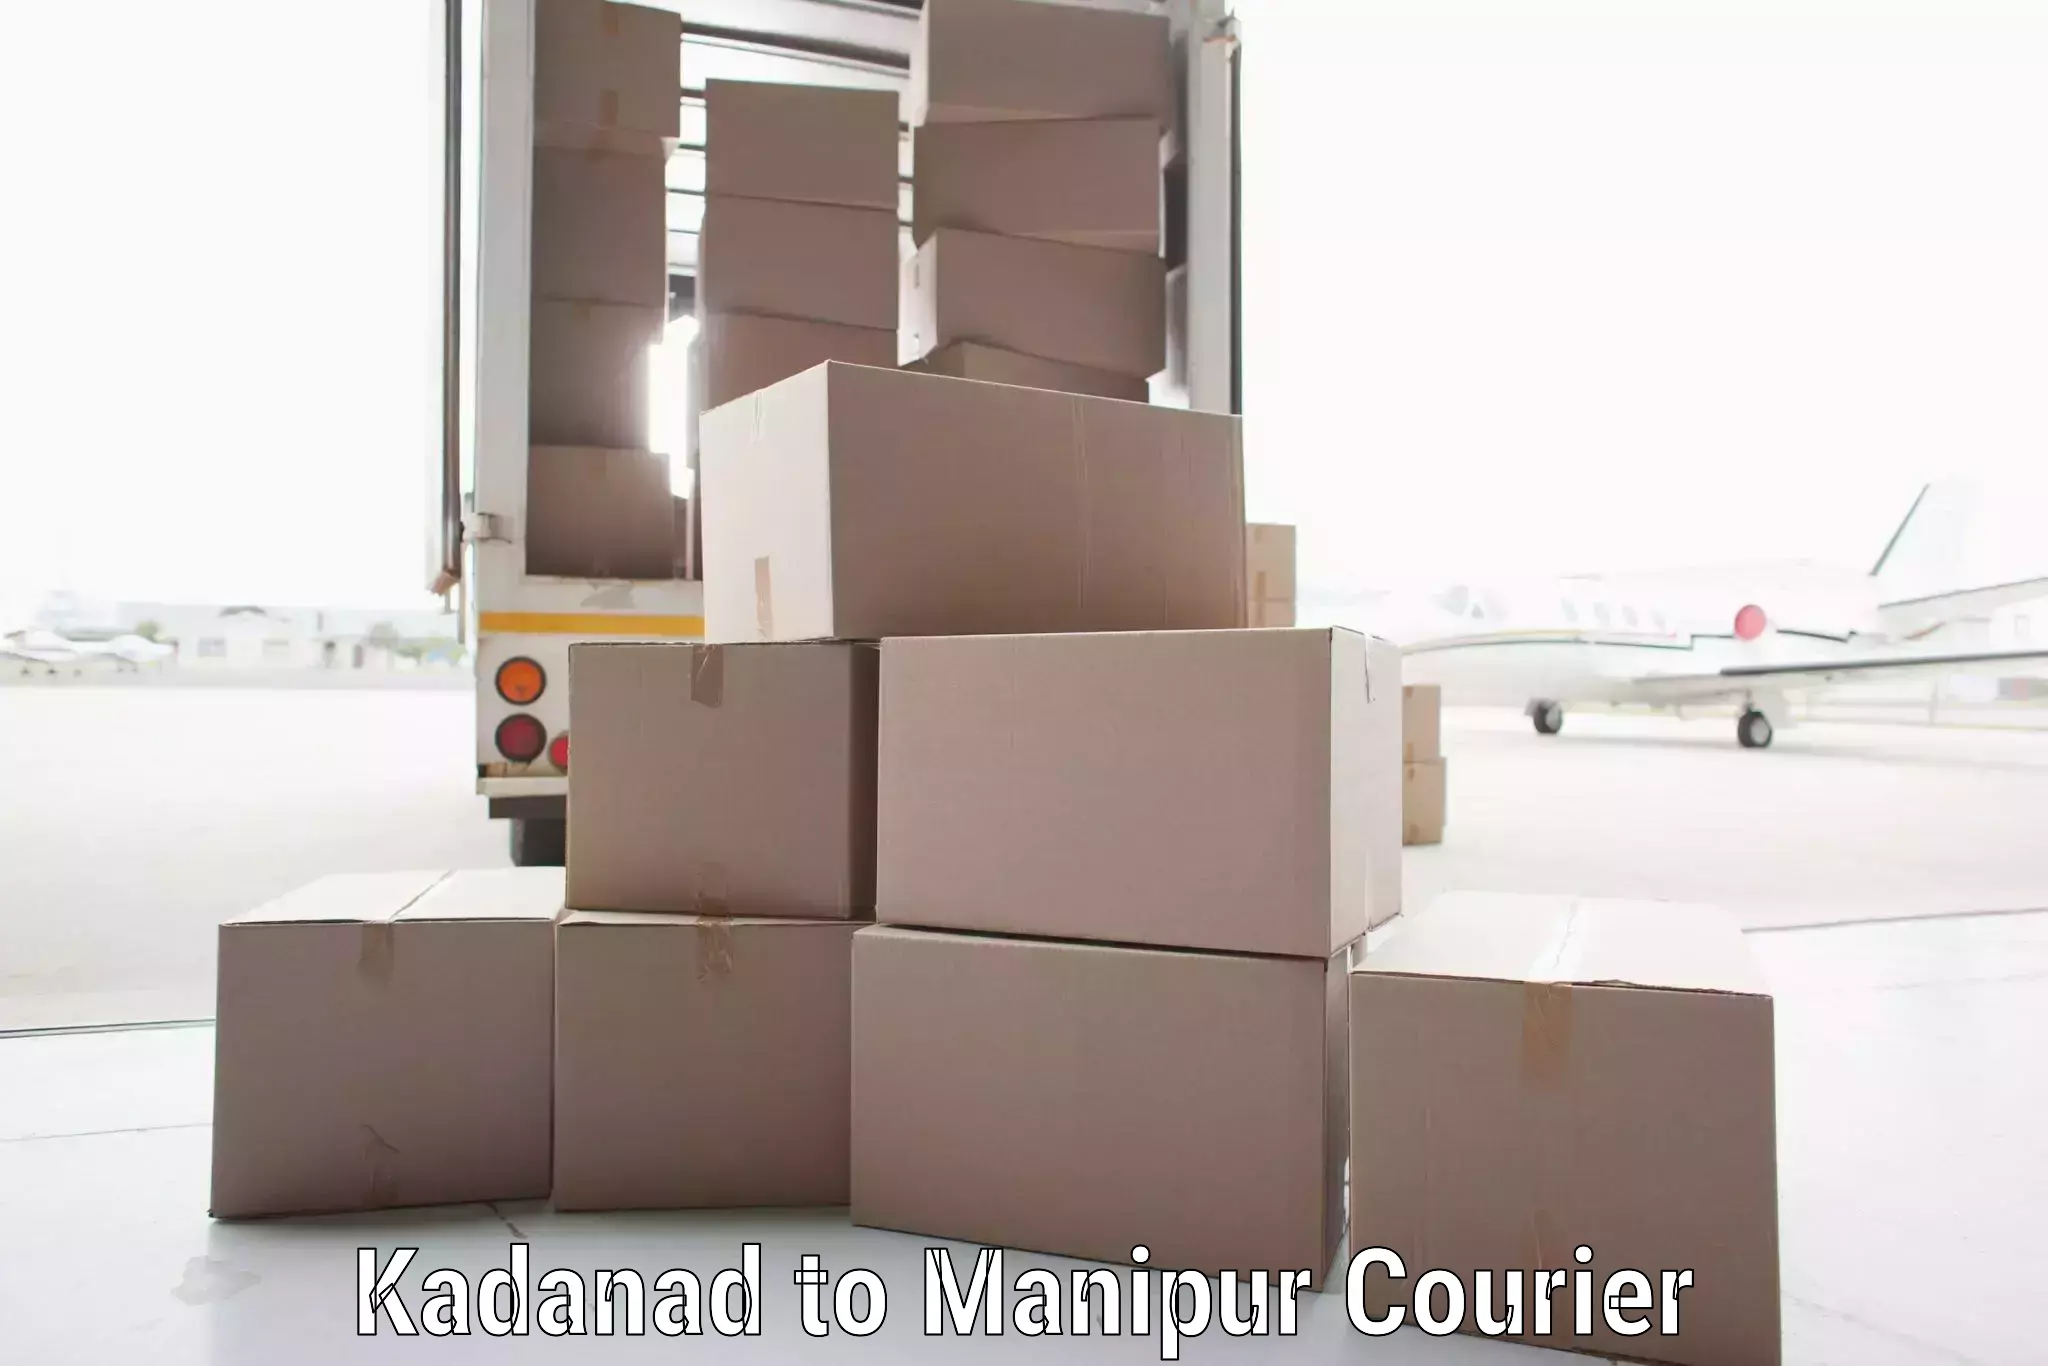 State-of-the-art courier technology Kadanad to Chandel